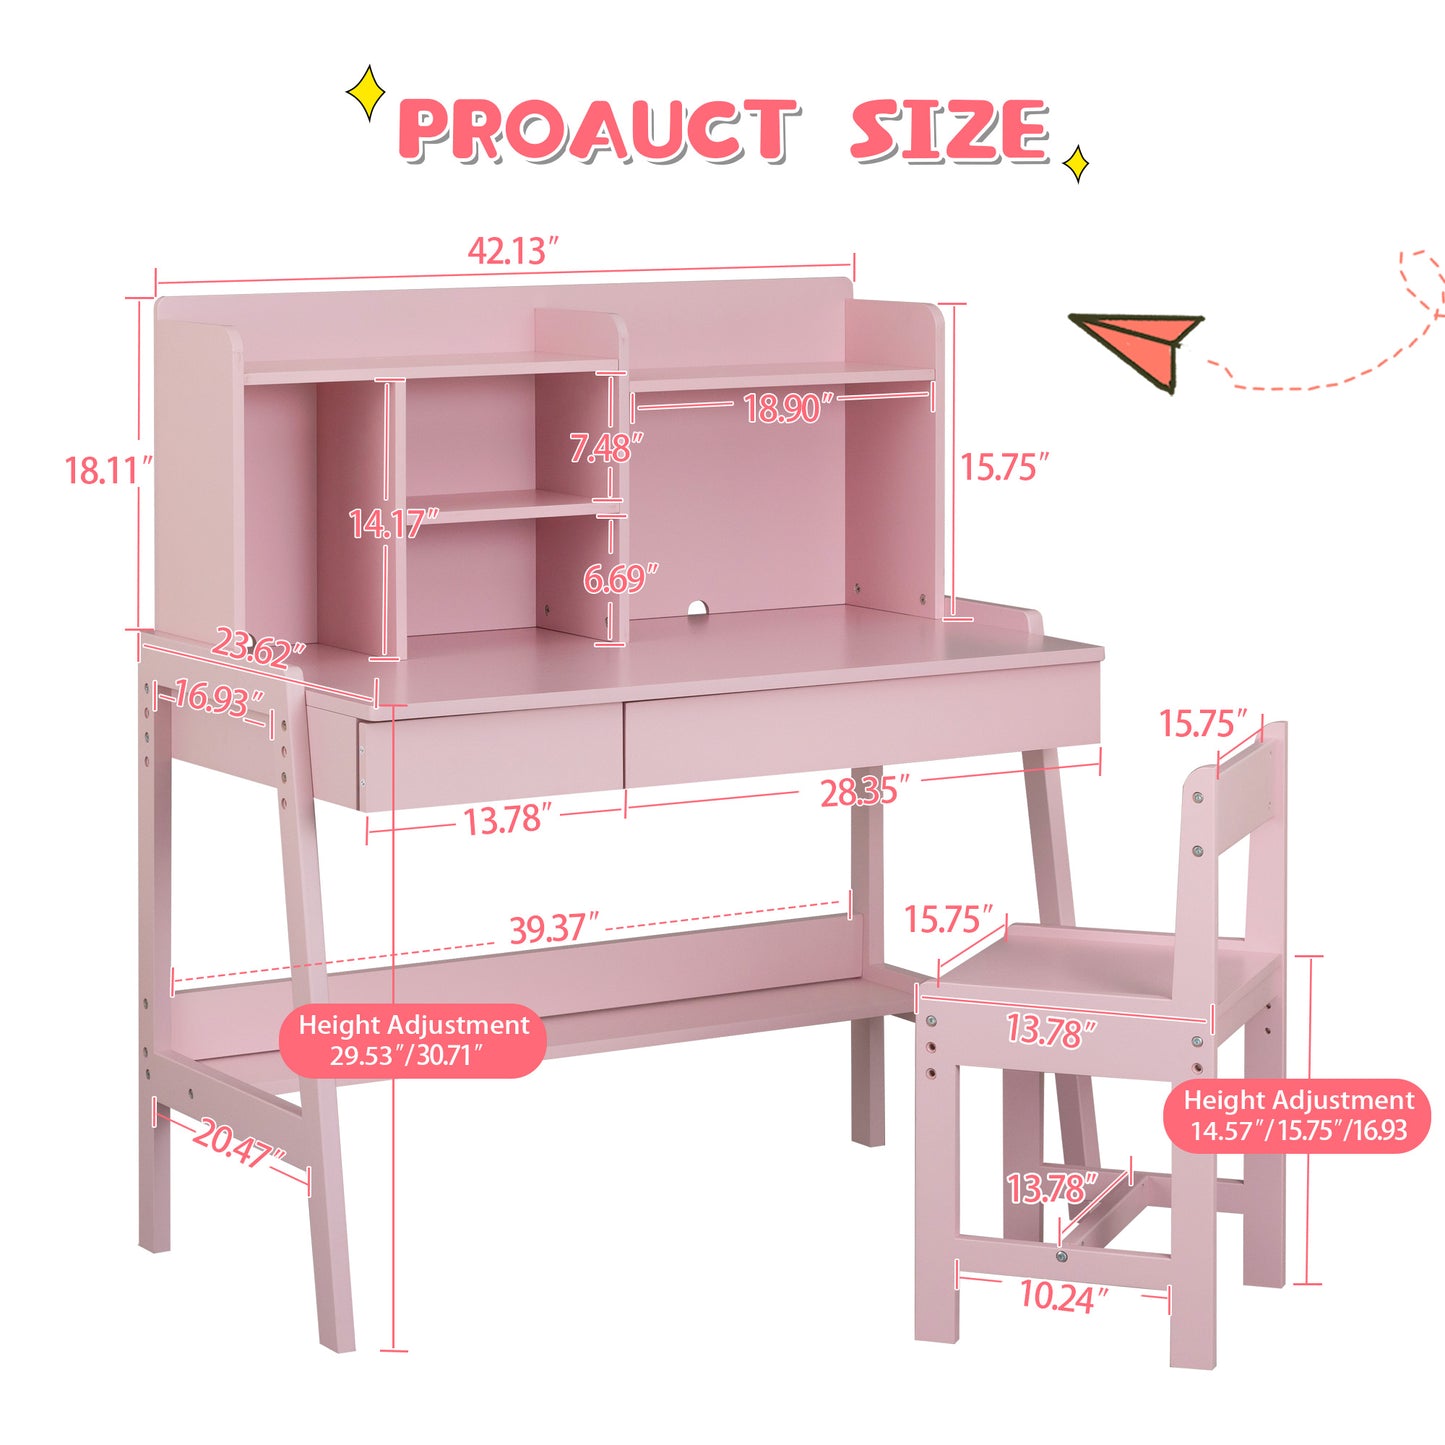 BTMWAY Kids Desk and Chair Set, Wood Study Desk for Kids with Chair, Children School Learning Table with Storage Drawers, Shelves, Student Writing Computer Workstation for Bedroom Study Room, Pink